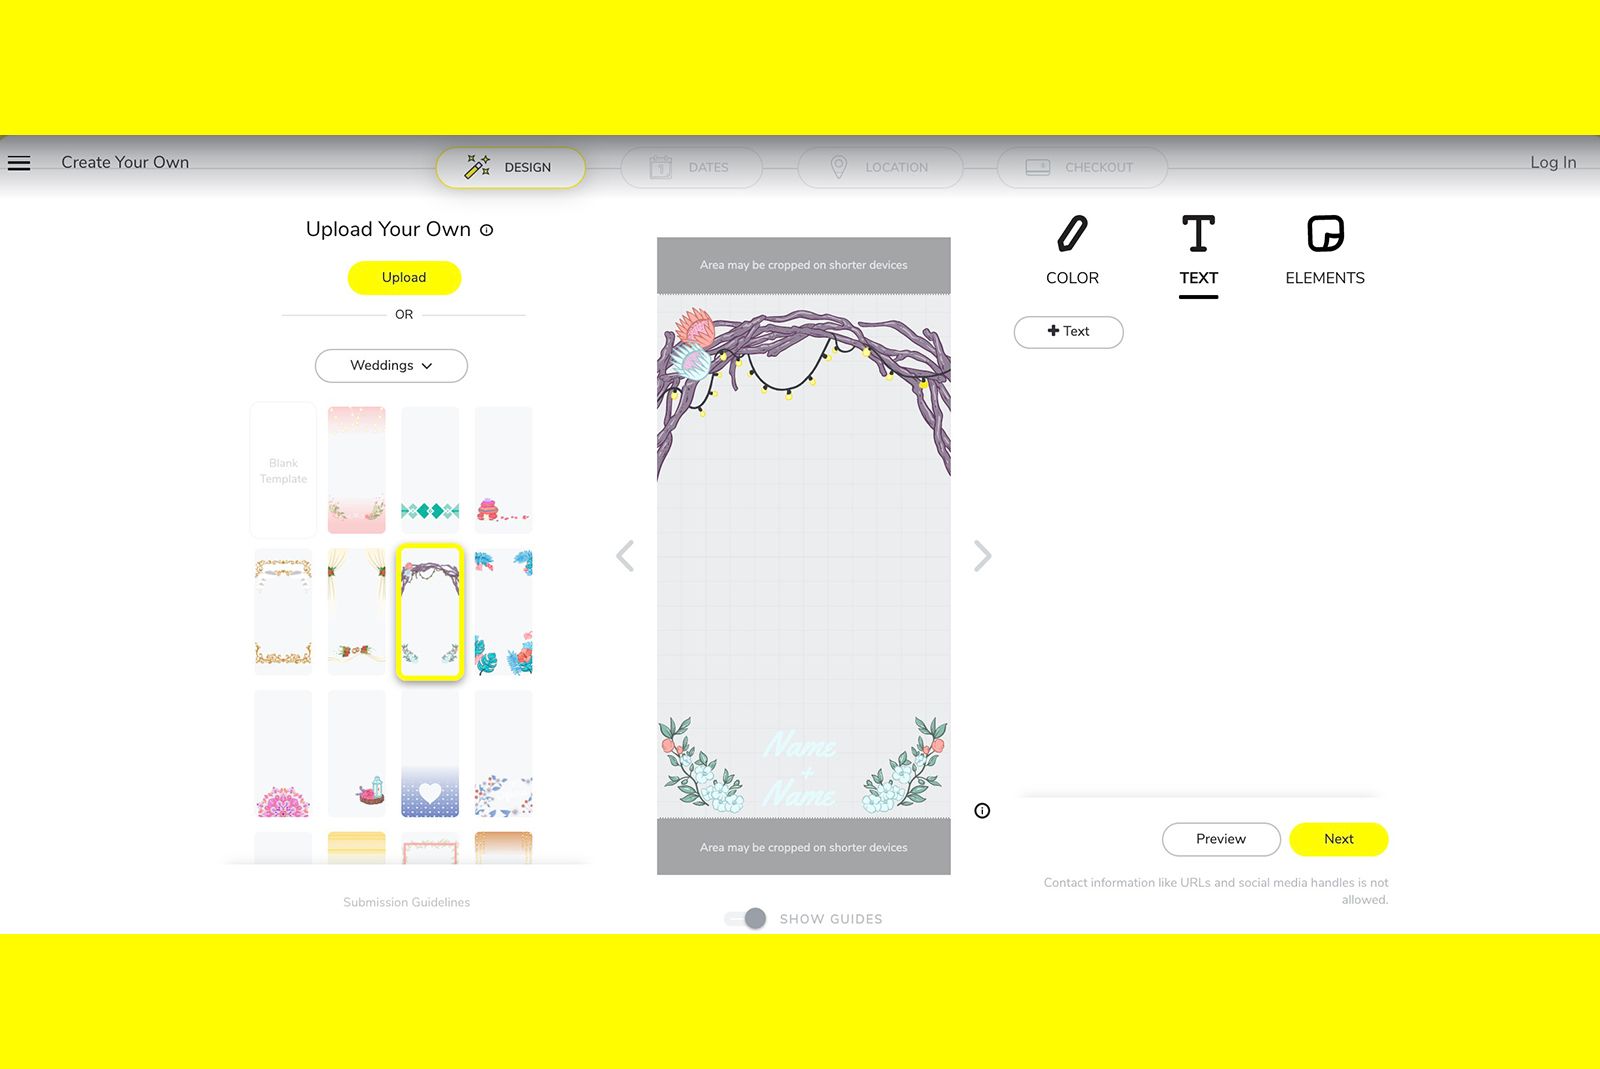 Design A Snapchat Geofilter For You In Less Than 24 Hours